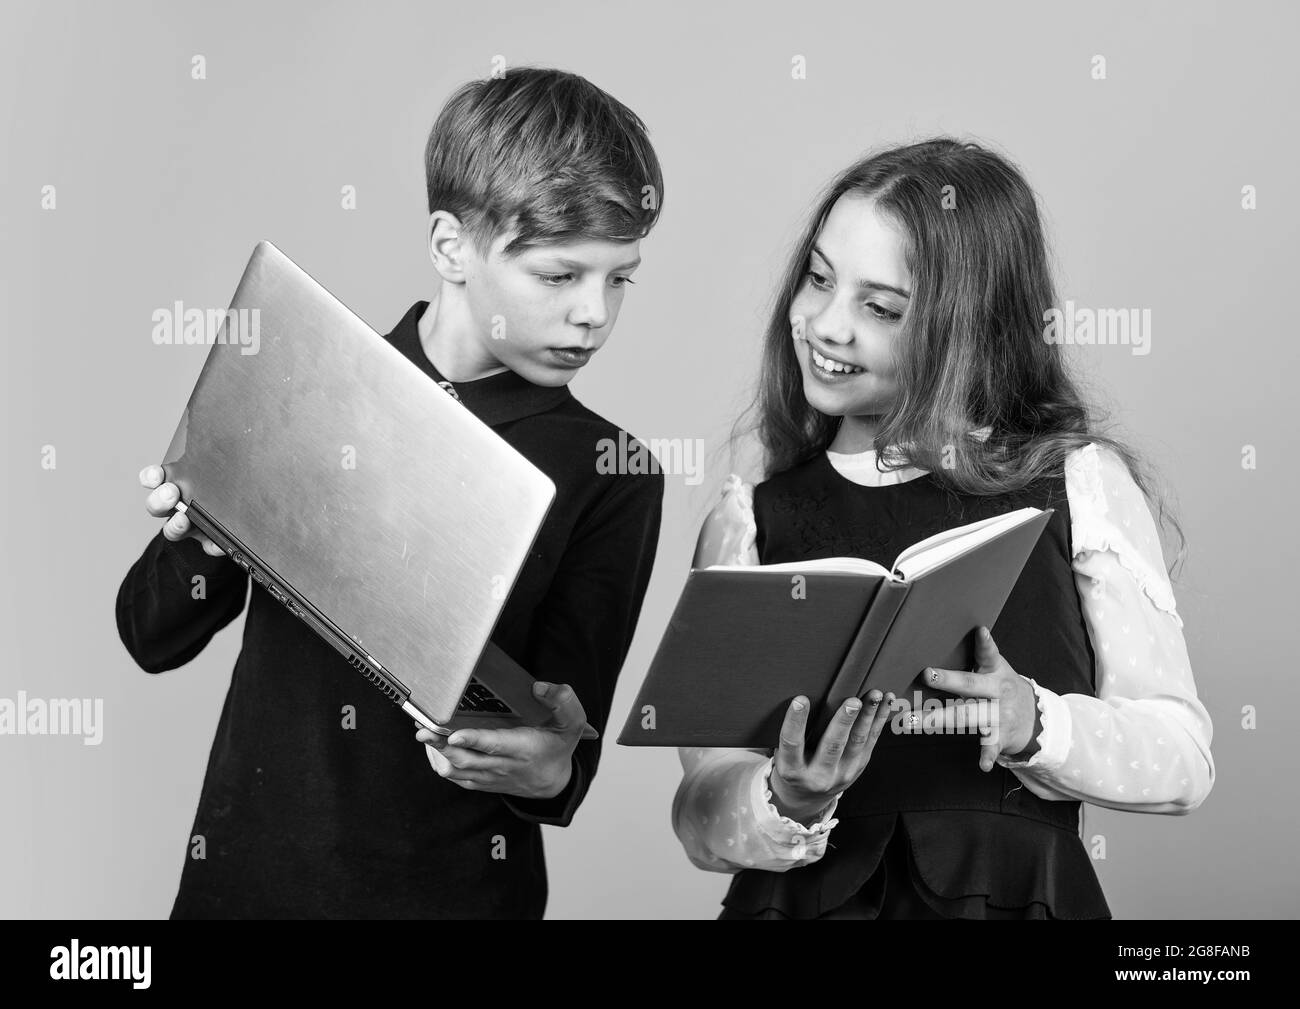 Digital technology for learning. Small children use new technology at school. Little girl and boy hold IT book and laptop. Technology in education Stock Photo